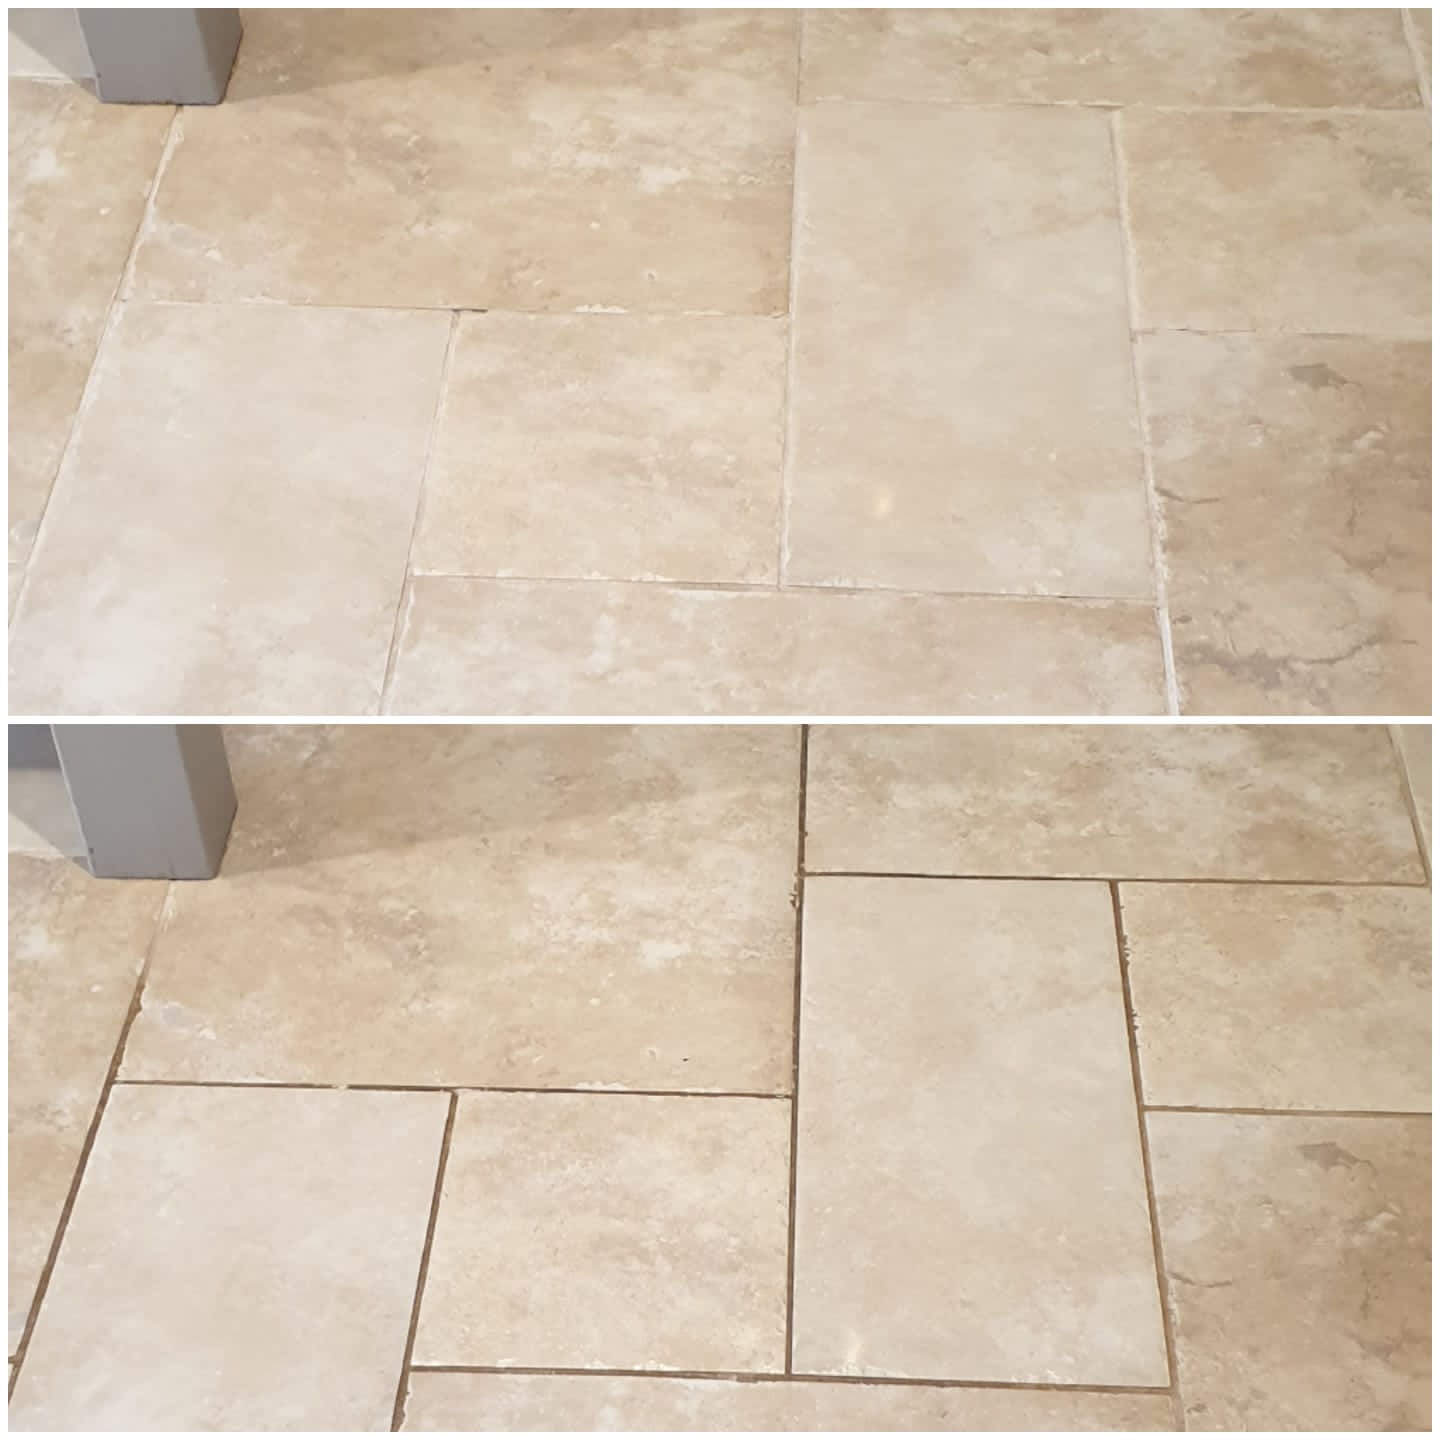 kitchen tiles before and after